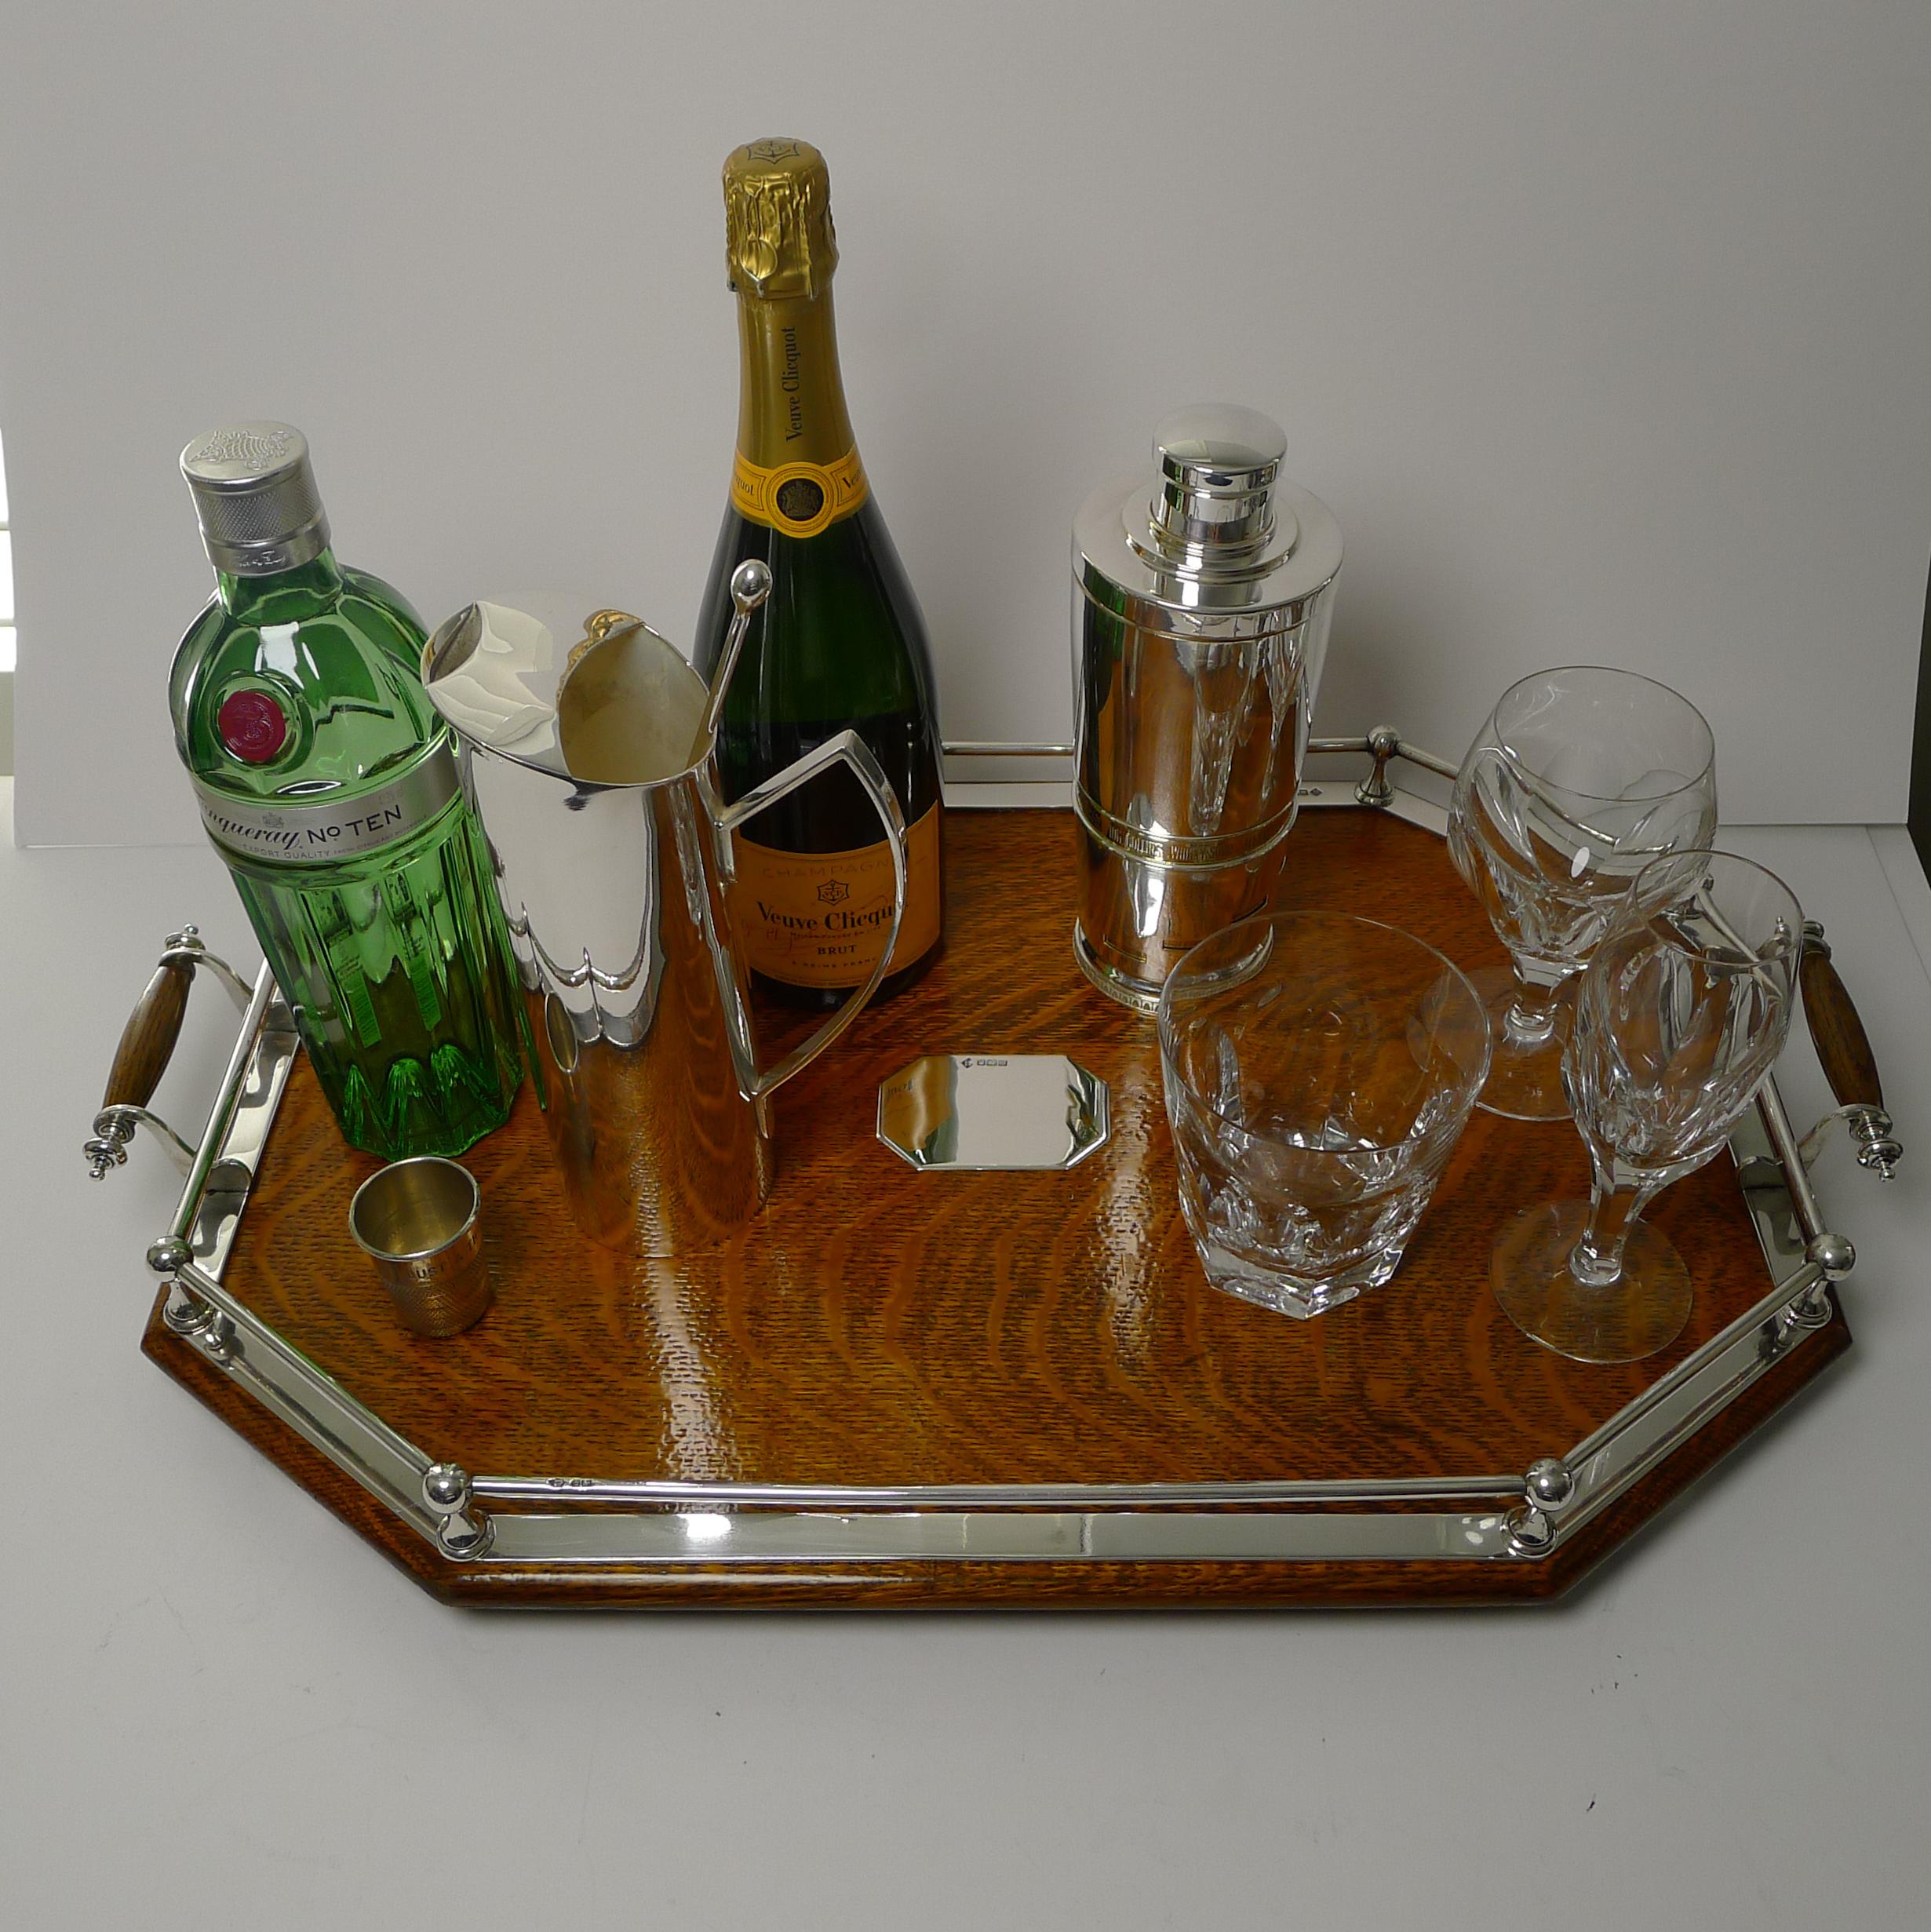 A rare opportunity to acquire an Edwardian Oak tray with solid silver fittings, rather than silver plate usually found.

Everything you see in 